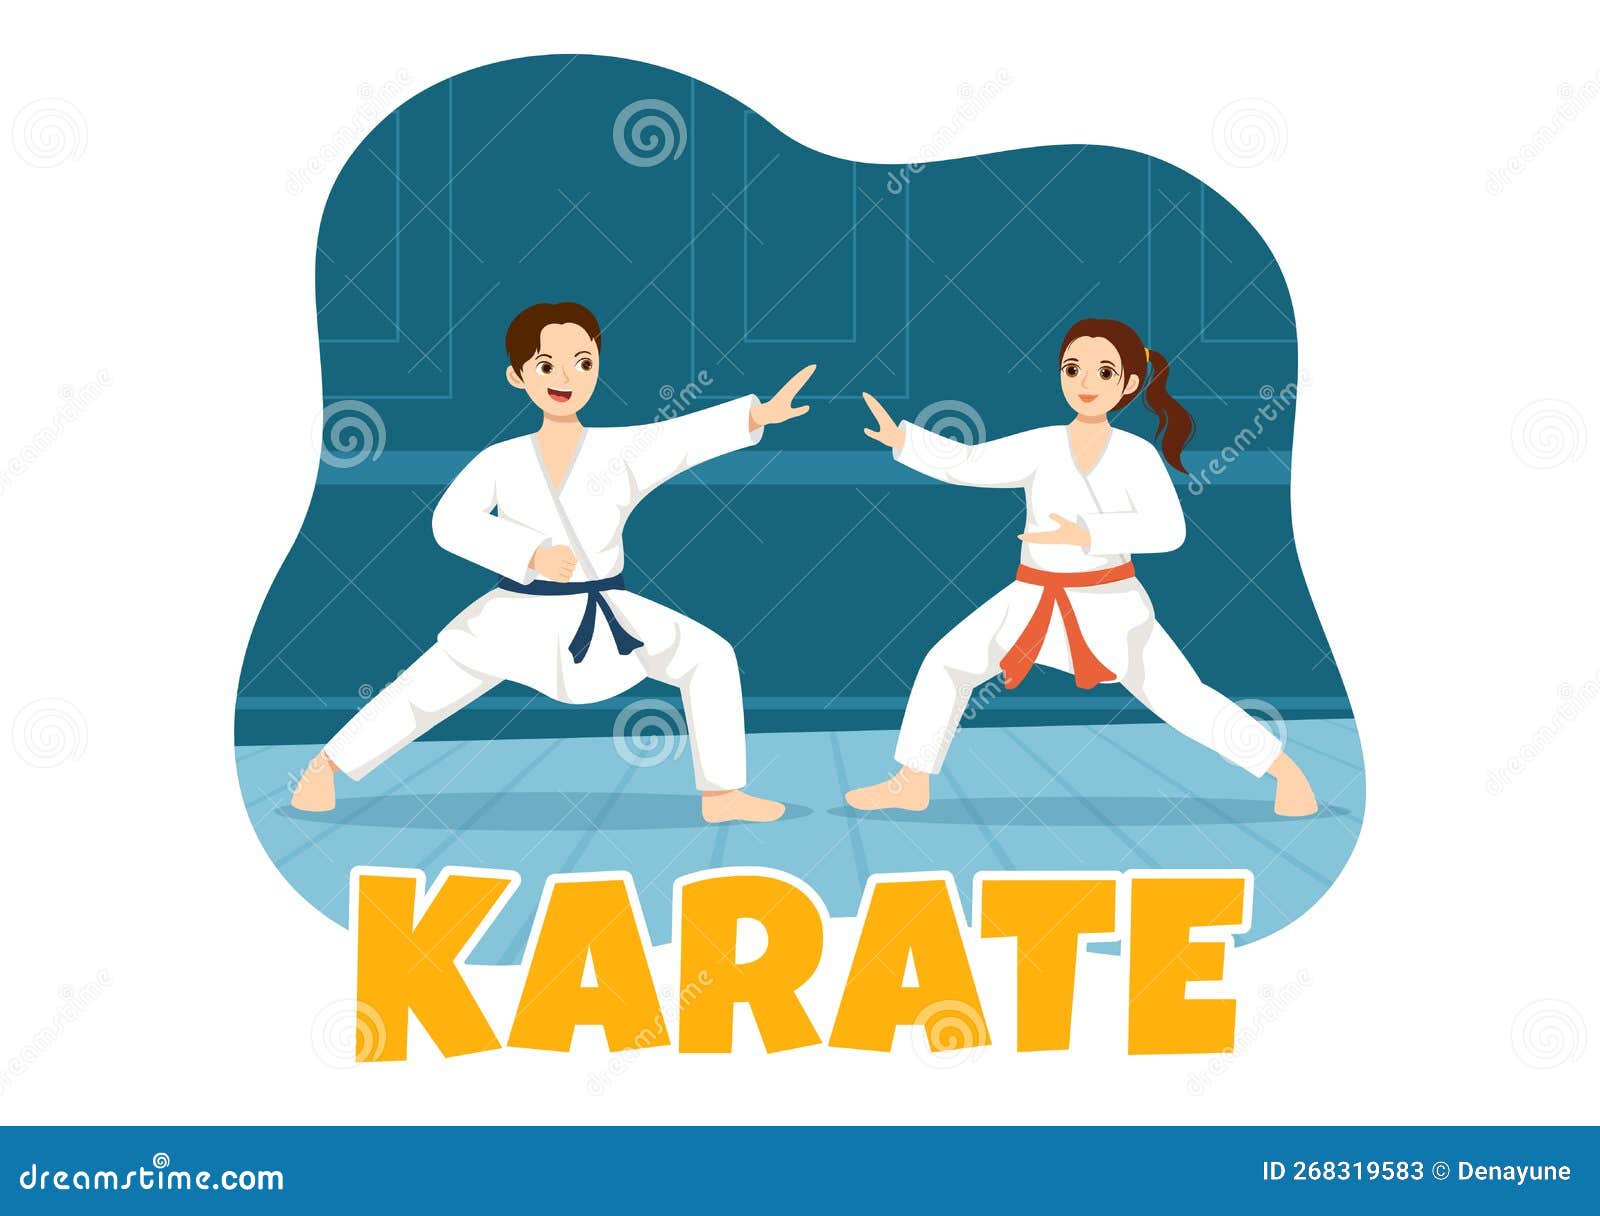 People Doing Some Basic Karate Martial Arts Moves, Fighting Pose and Wearing Kimono in Hand Drawn Templates Illustration. People Doing Some Basic Karate Martial Arts Moves, Fighting Pose and Wearing Kimono in Cartoon Hand Drawn for Landing Page Templates Illustration